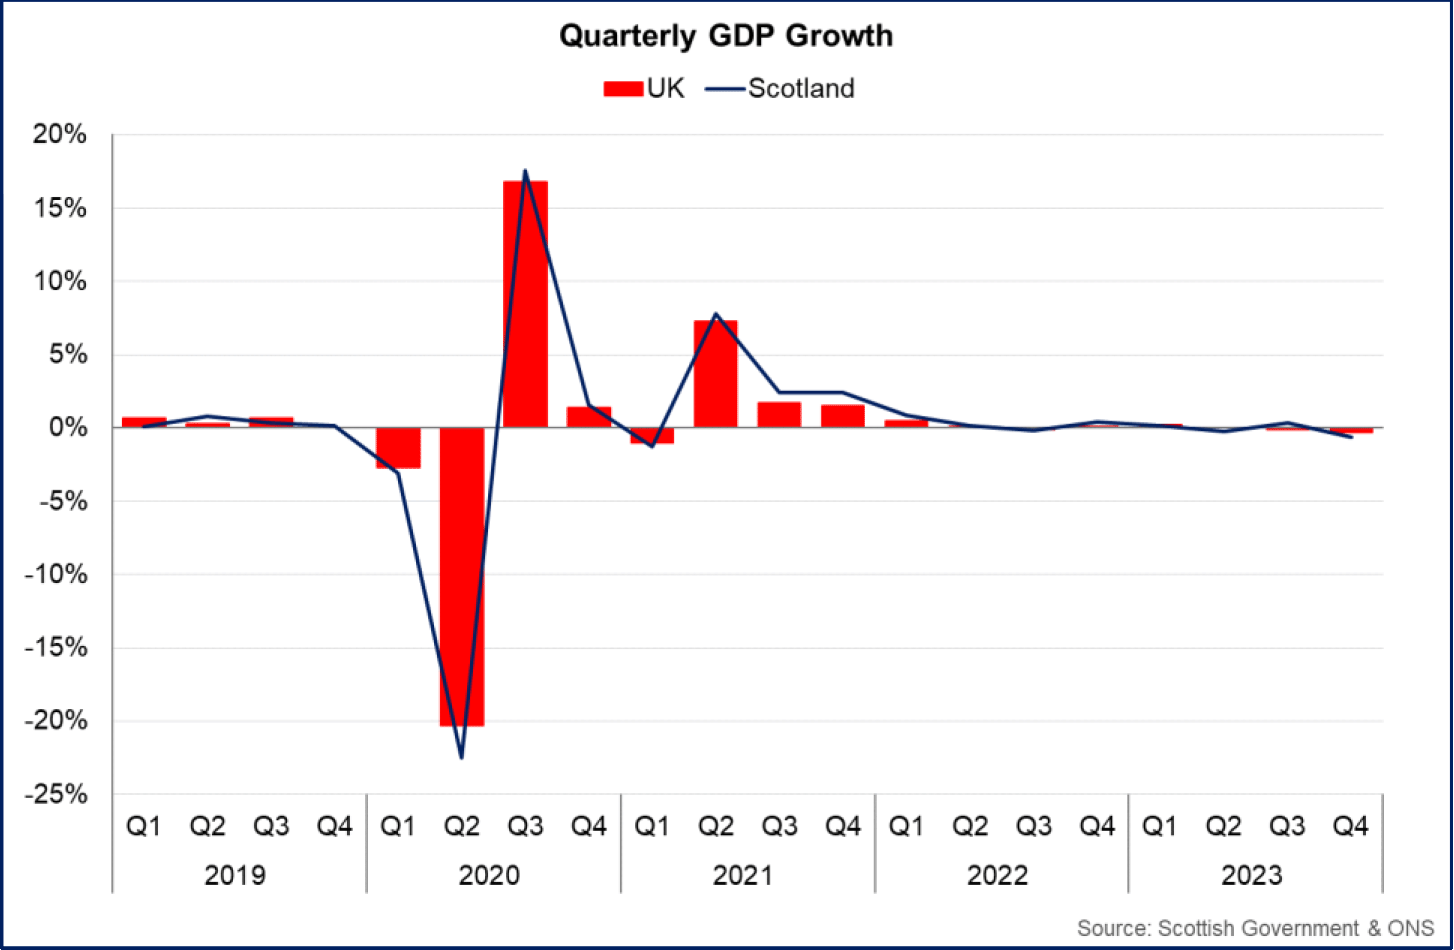 latest data showing subdued GDP growth in Scotland and the UK in 2023